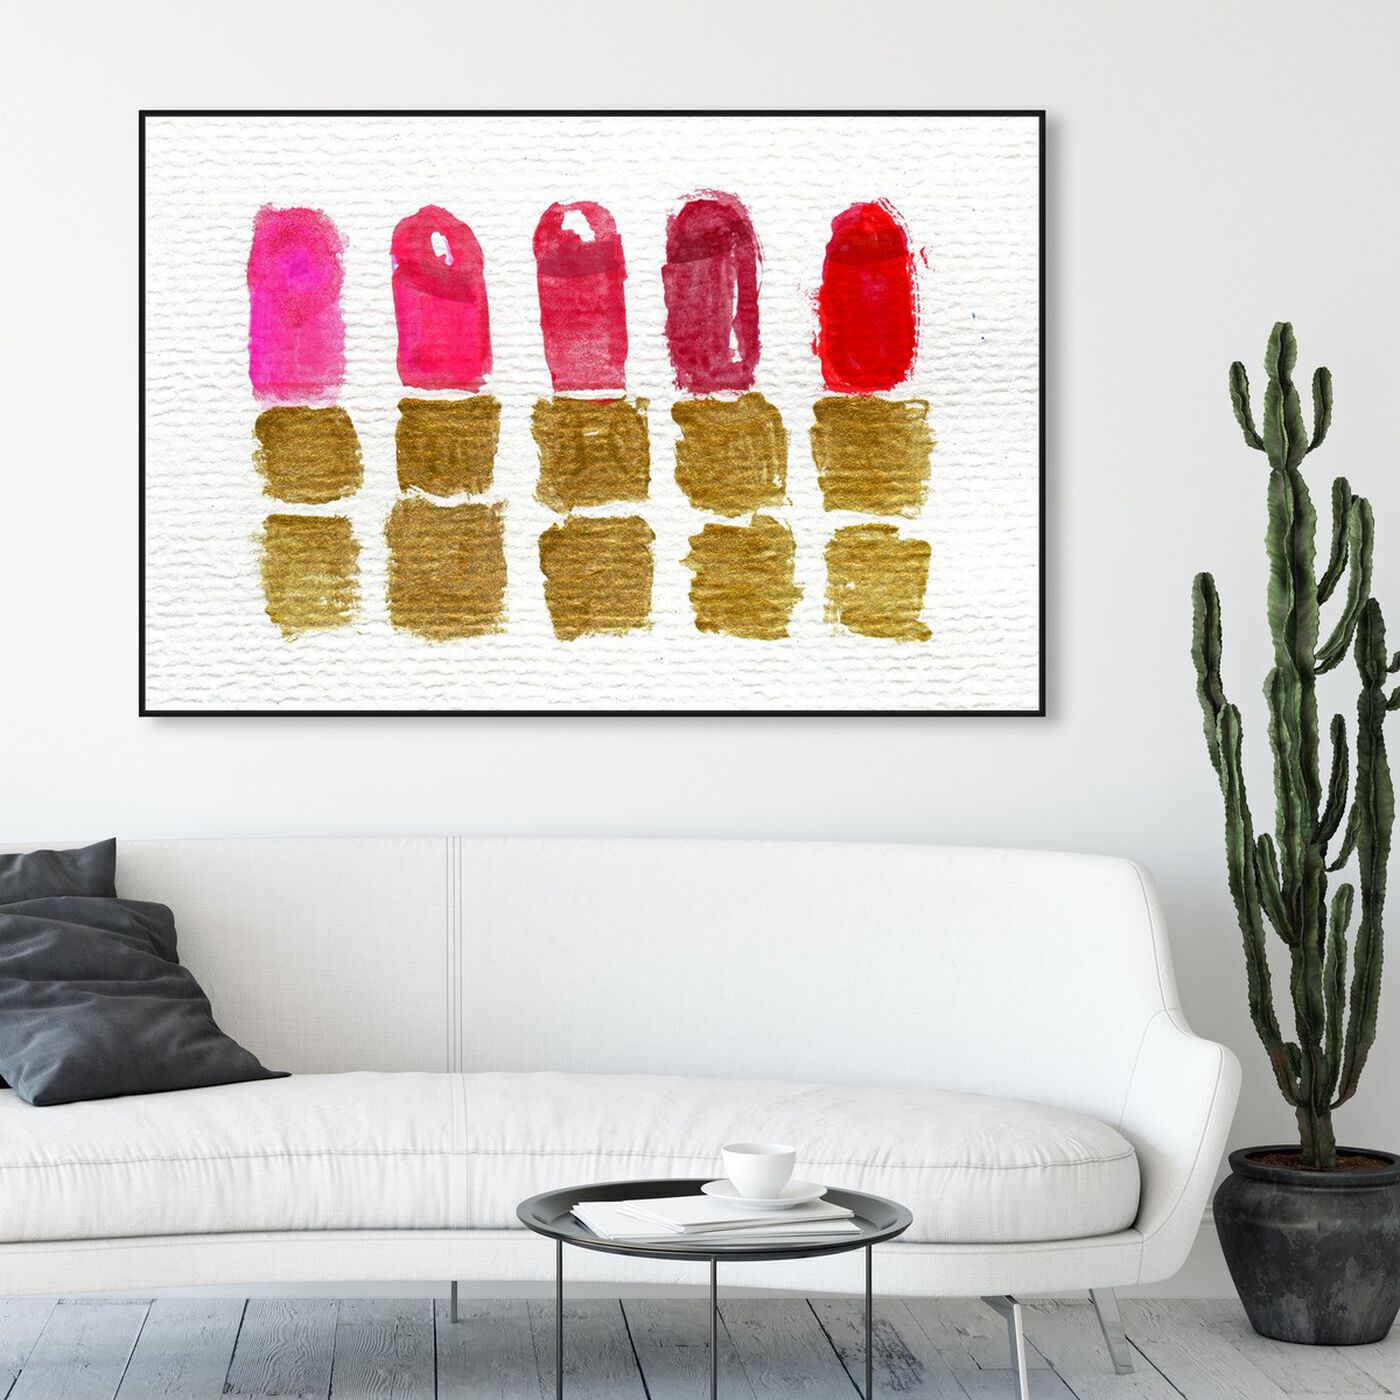 Hanging view of Lipstick Shades  featuring fashion and glam and makeup art.